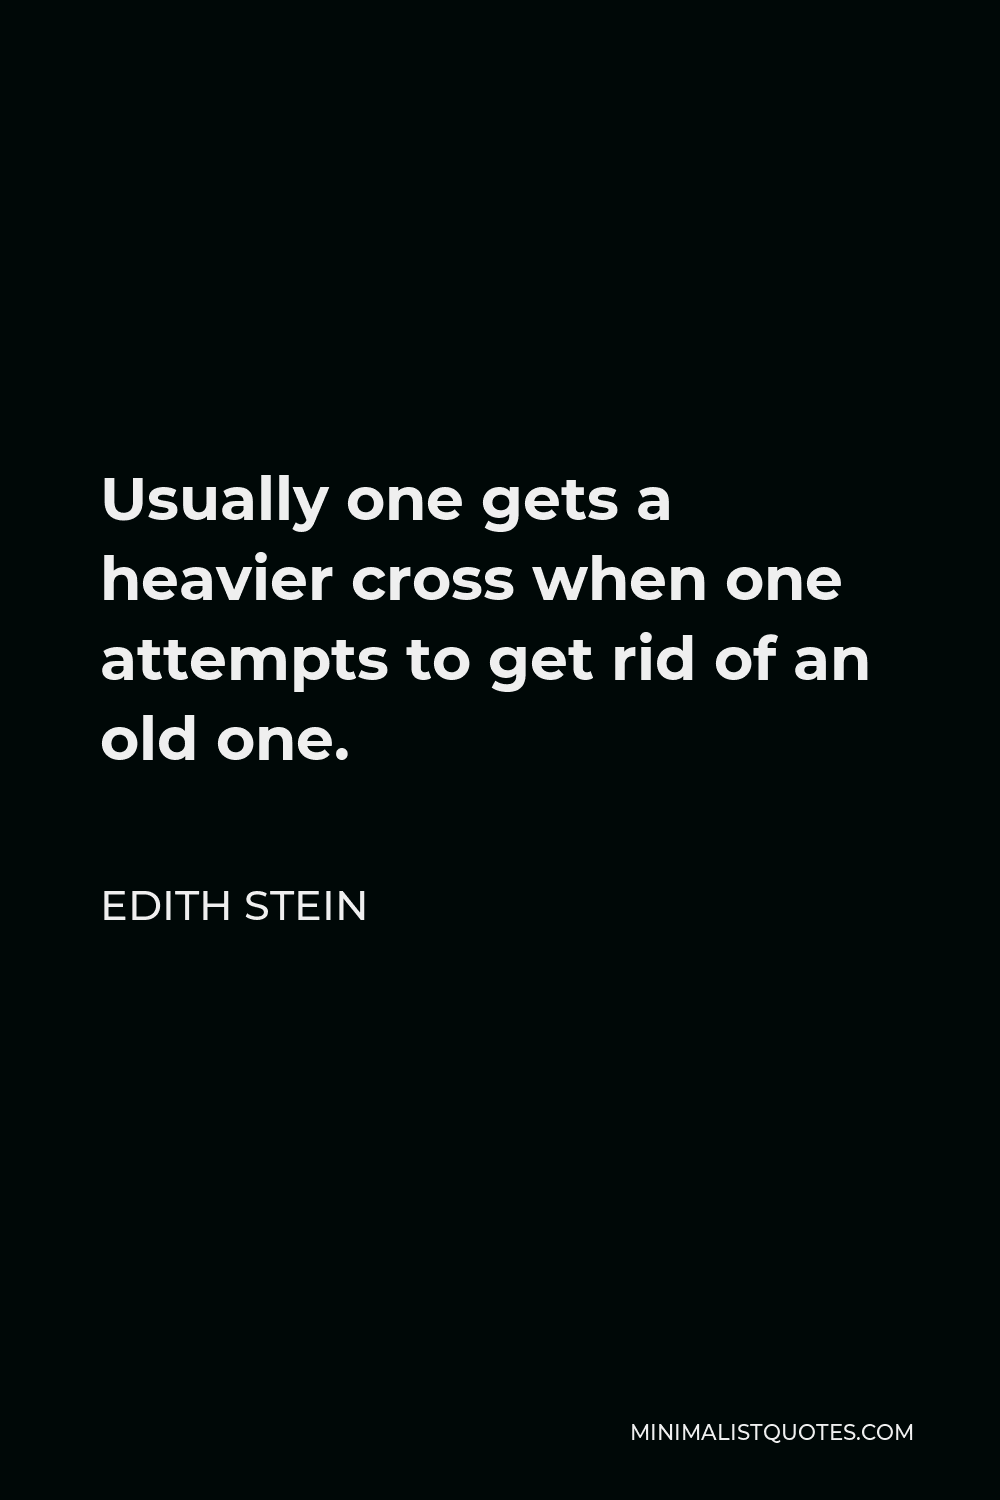 Edith Stein Quote - Usually one gets a heavier cross when one attempts to get rid of an old one.